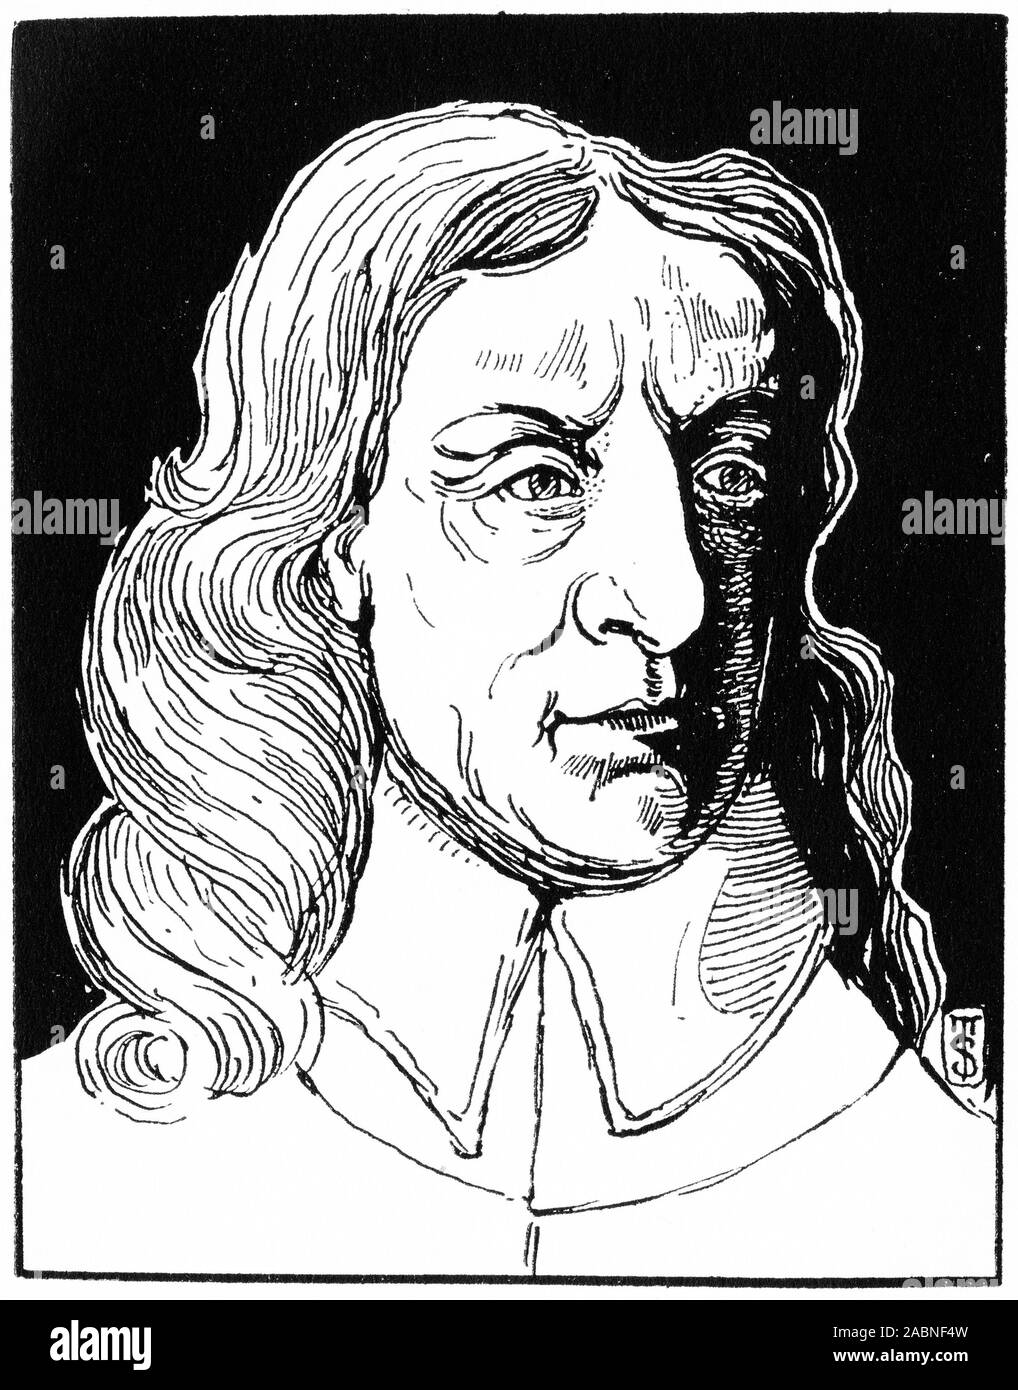 Engraved portrait of Oliver Cromwell (1599 – 1658) English military and political leader. He served as Lord Protector of the Commonwealth of England, Scotland, and Ireland from 1653 until his death, acting as head of state and head of government of the new republic. Stock Photo